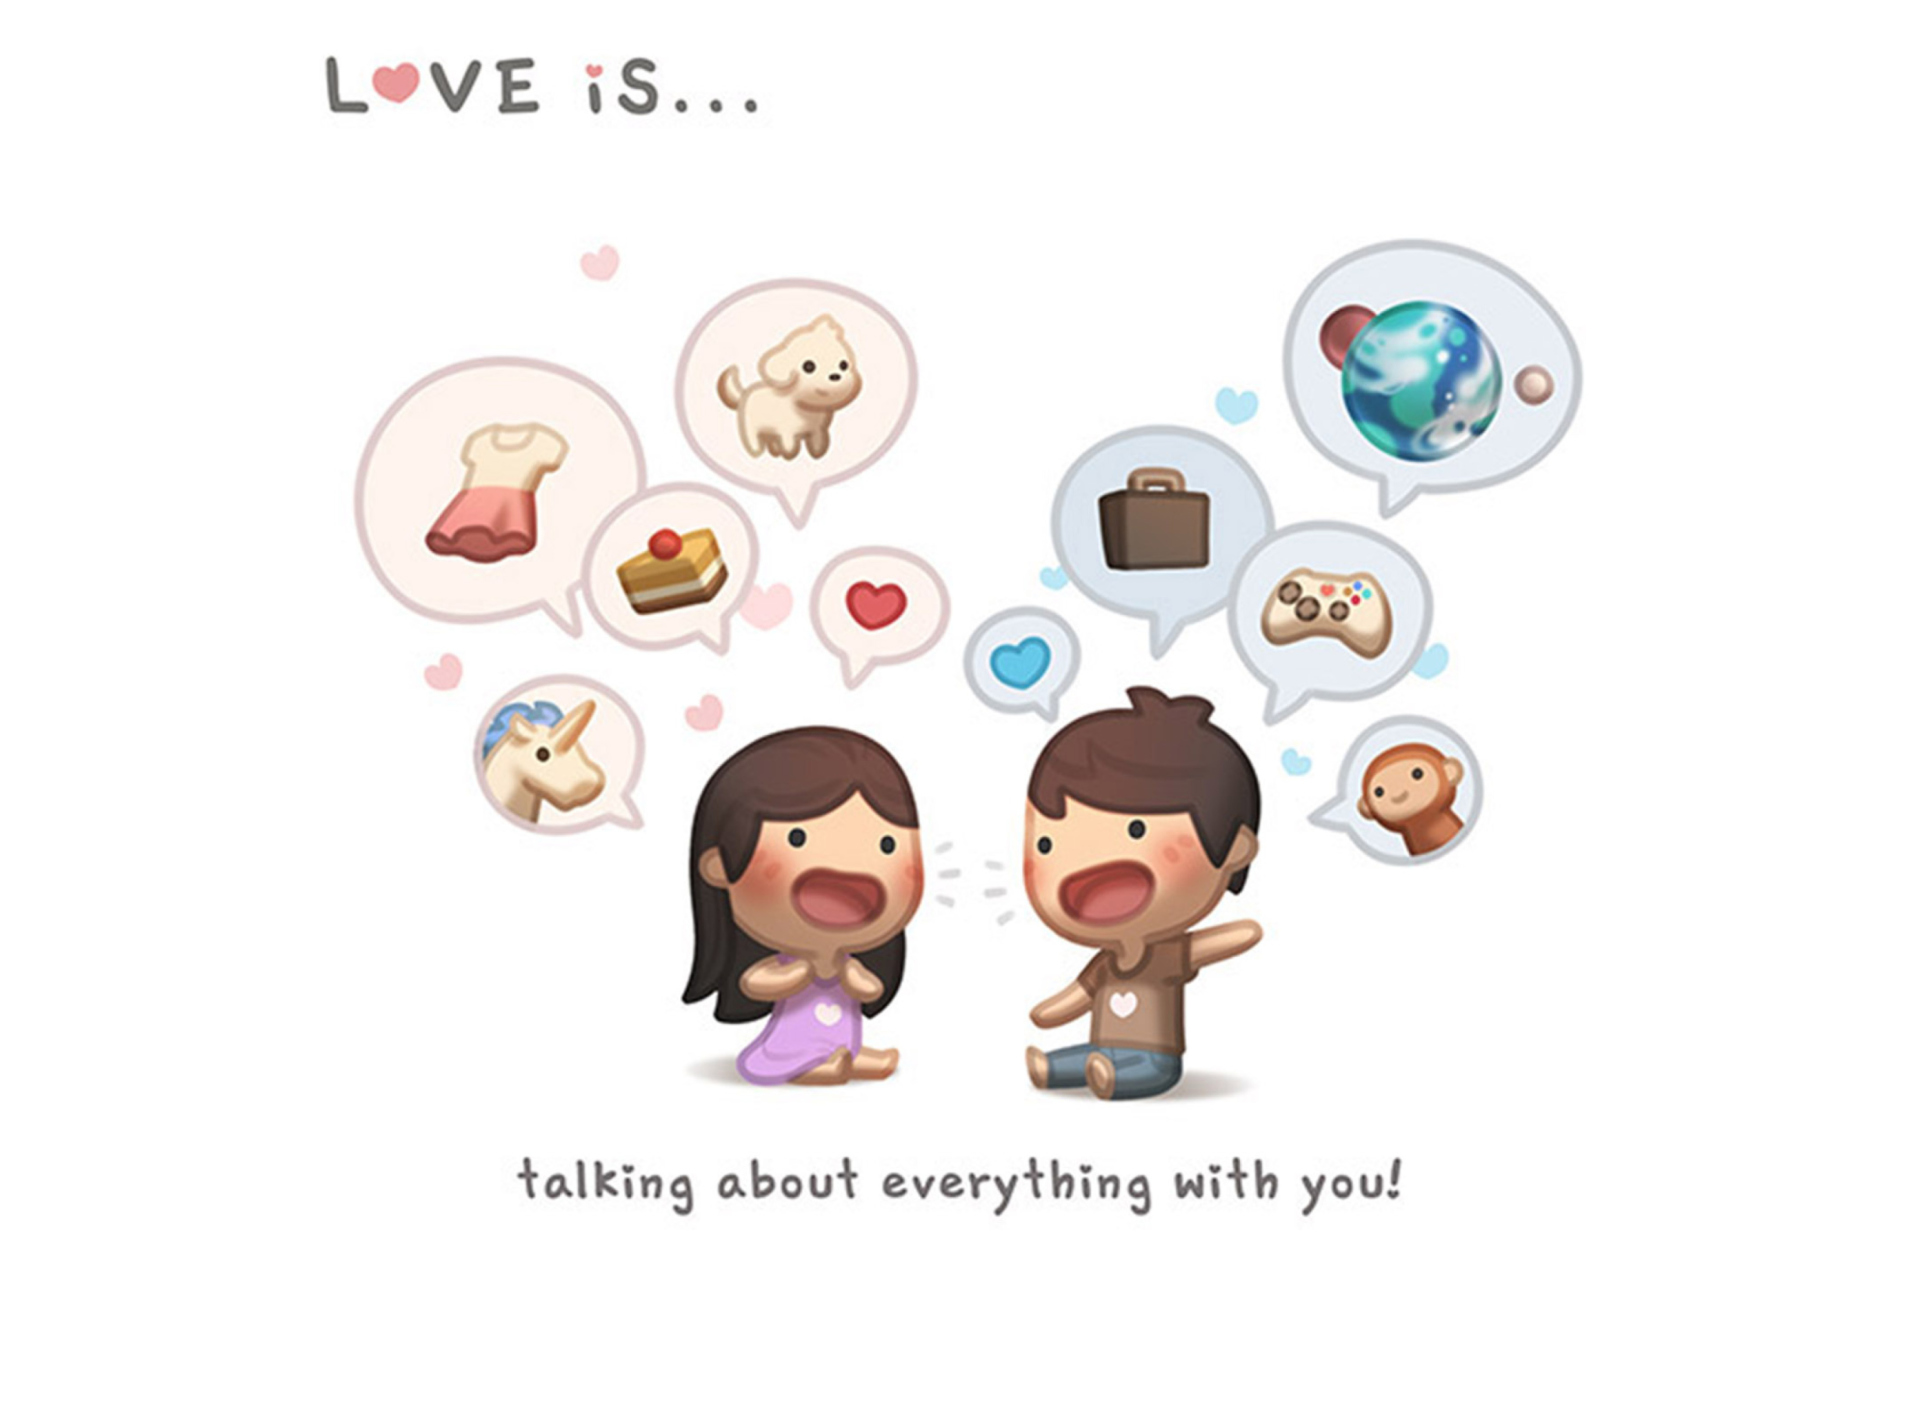 Das Love Is - Talking About Everything With You Wallpaper 1920x1408